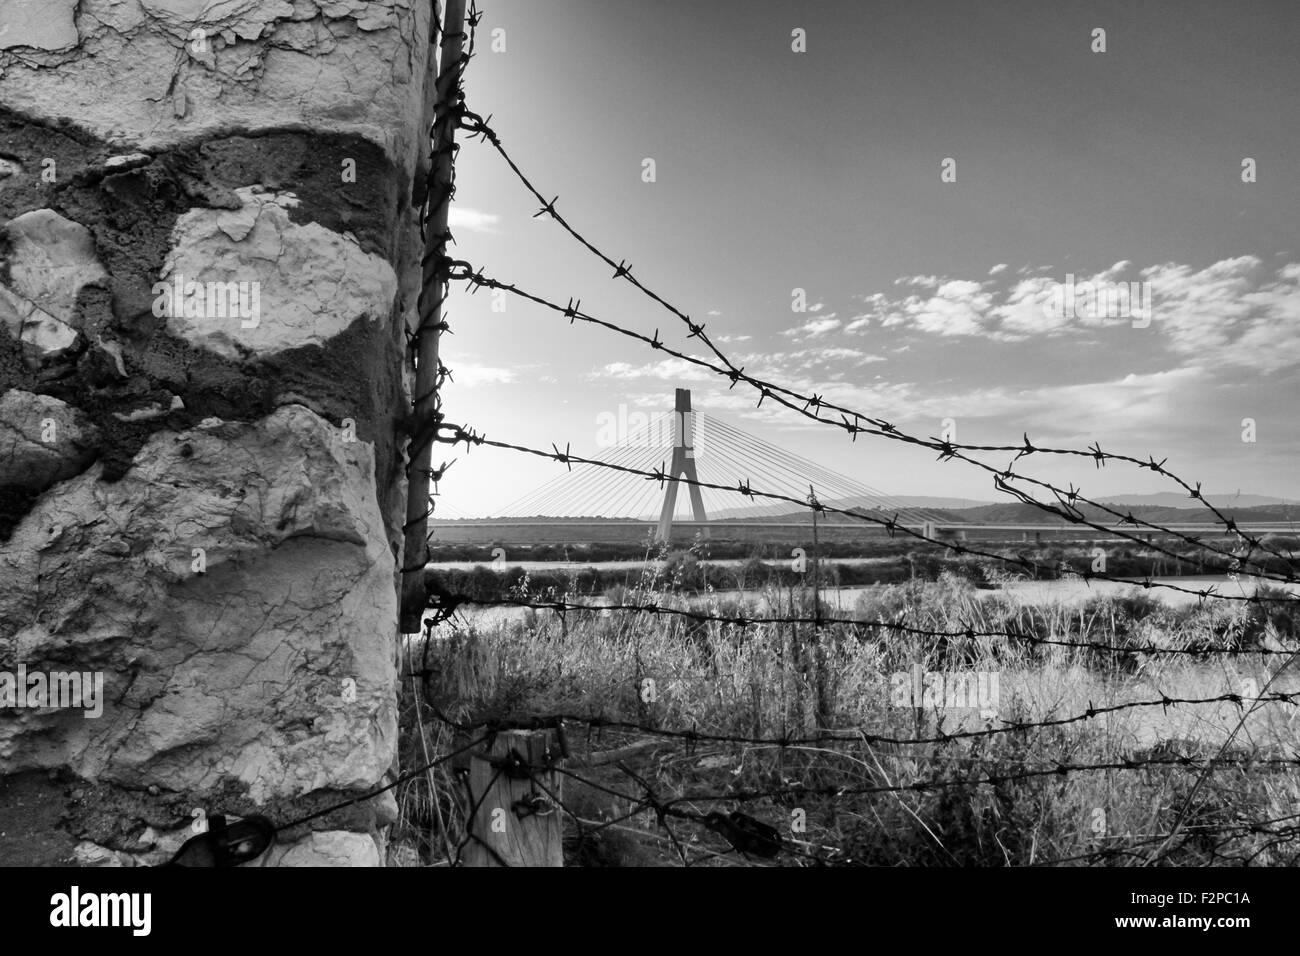 BW photo of a stone wall with barb wire with bridge in the back Stock Photo